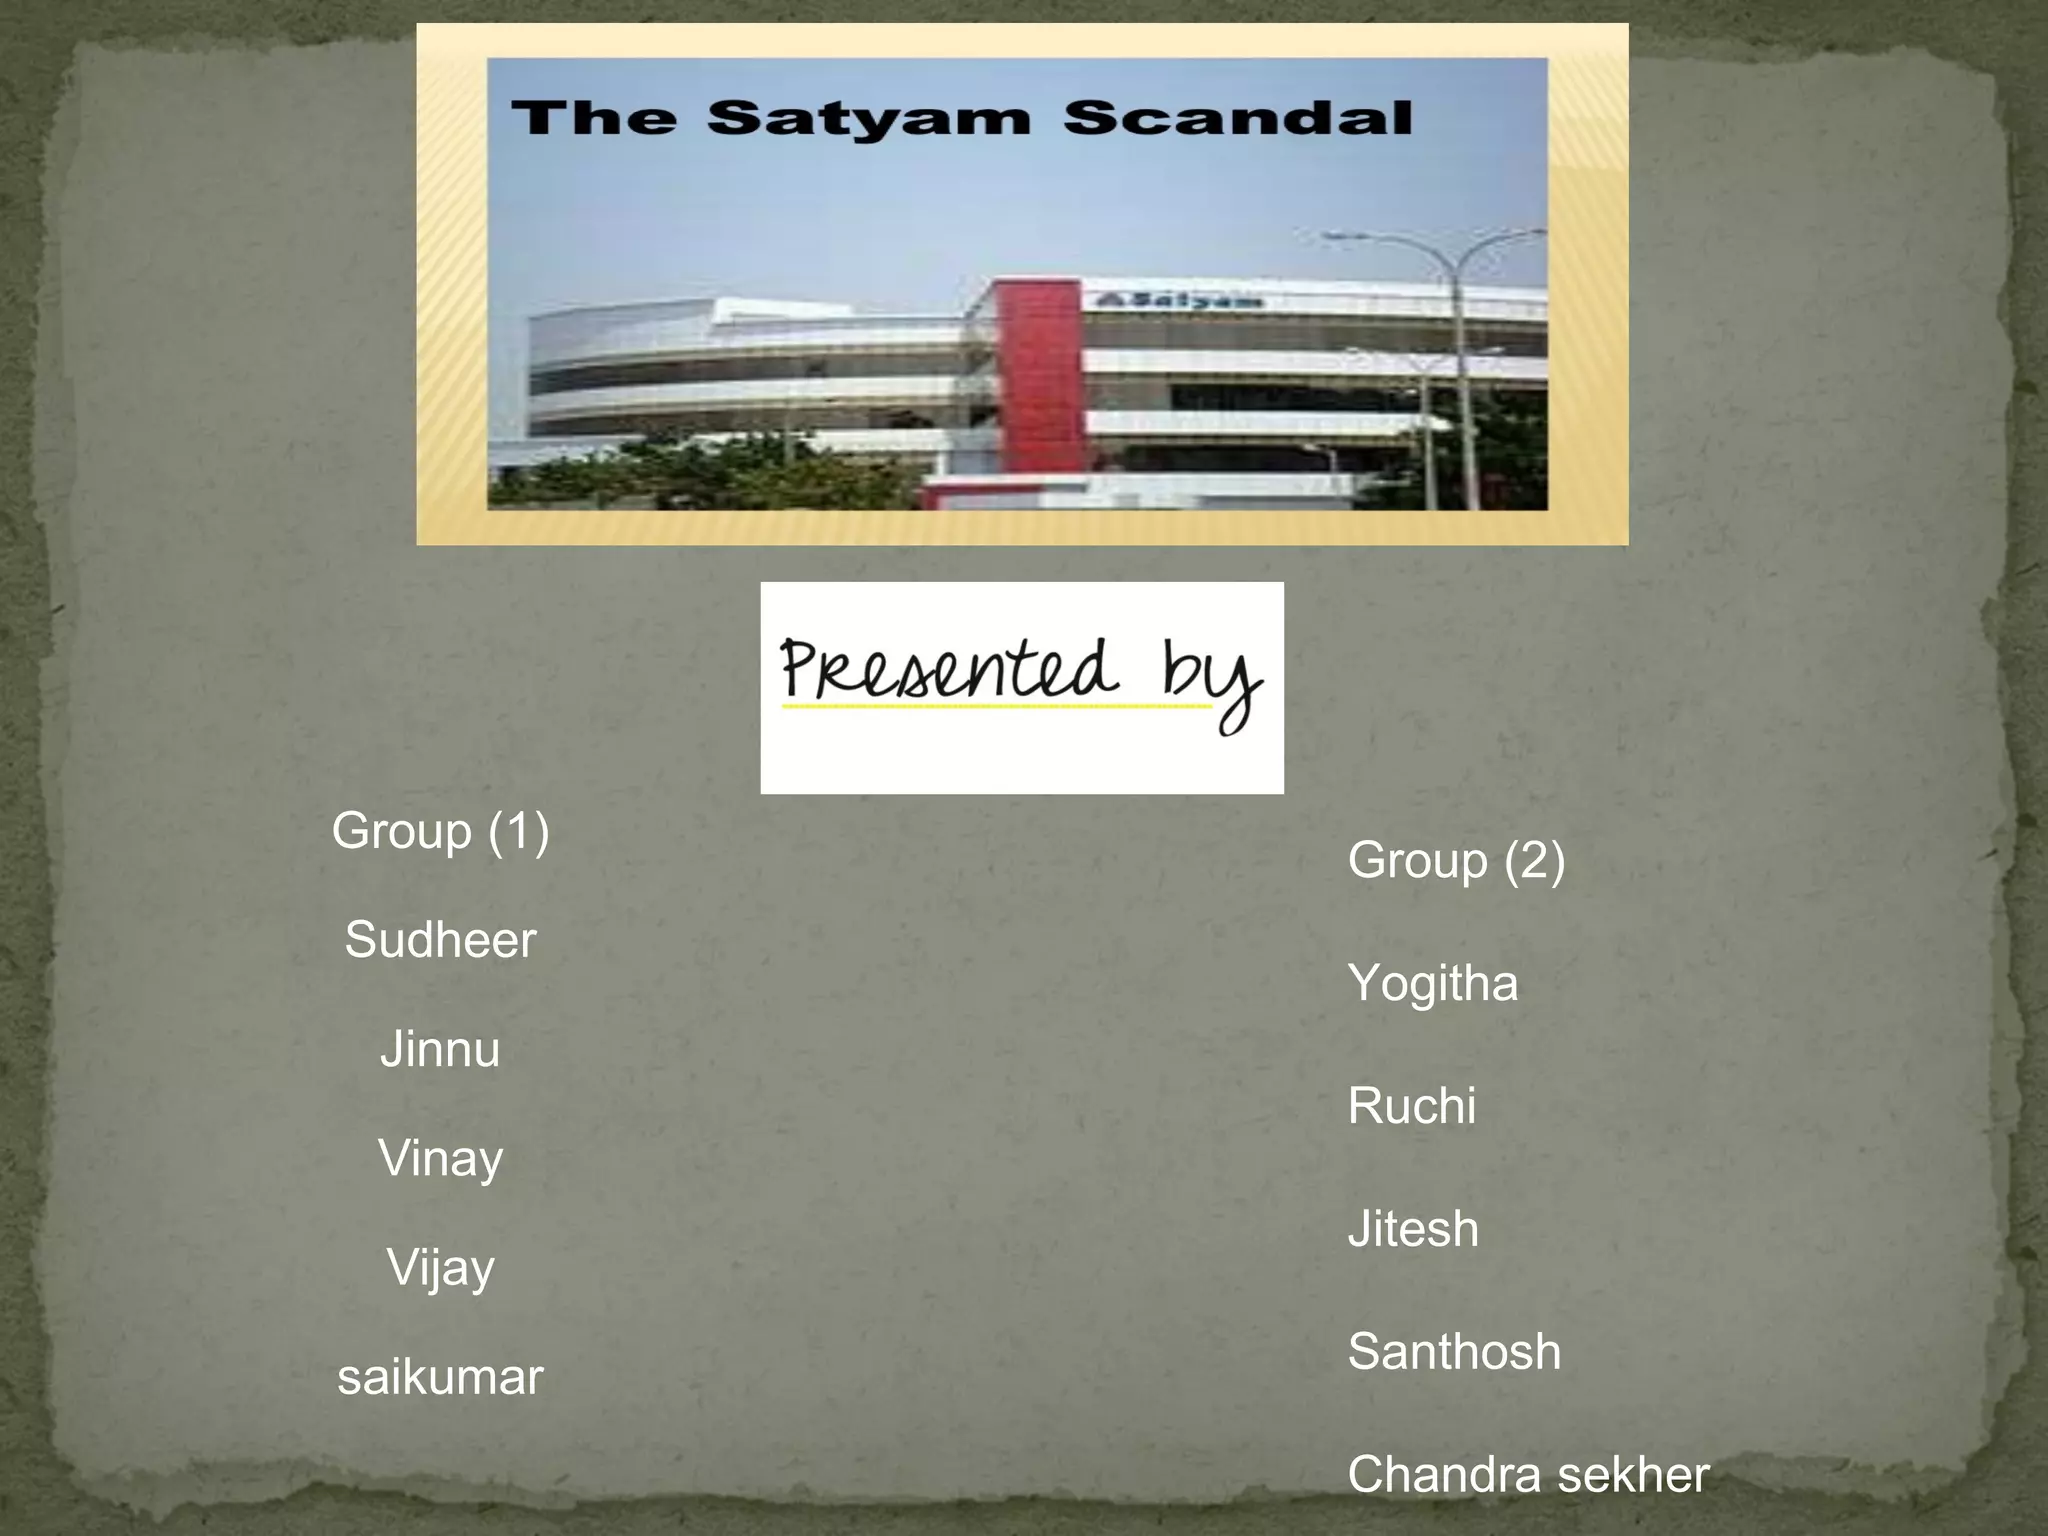 satyam case study questions and answers